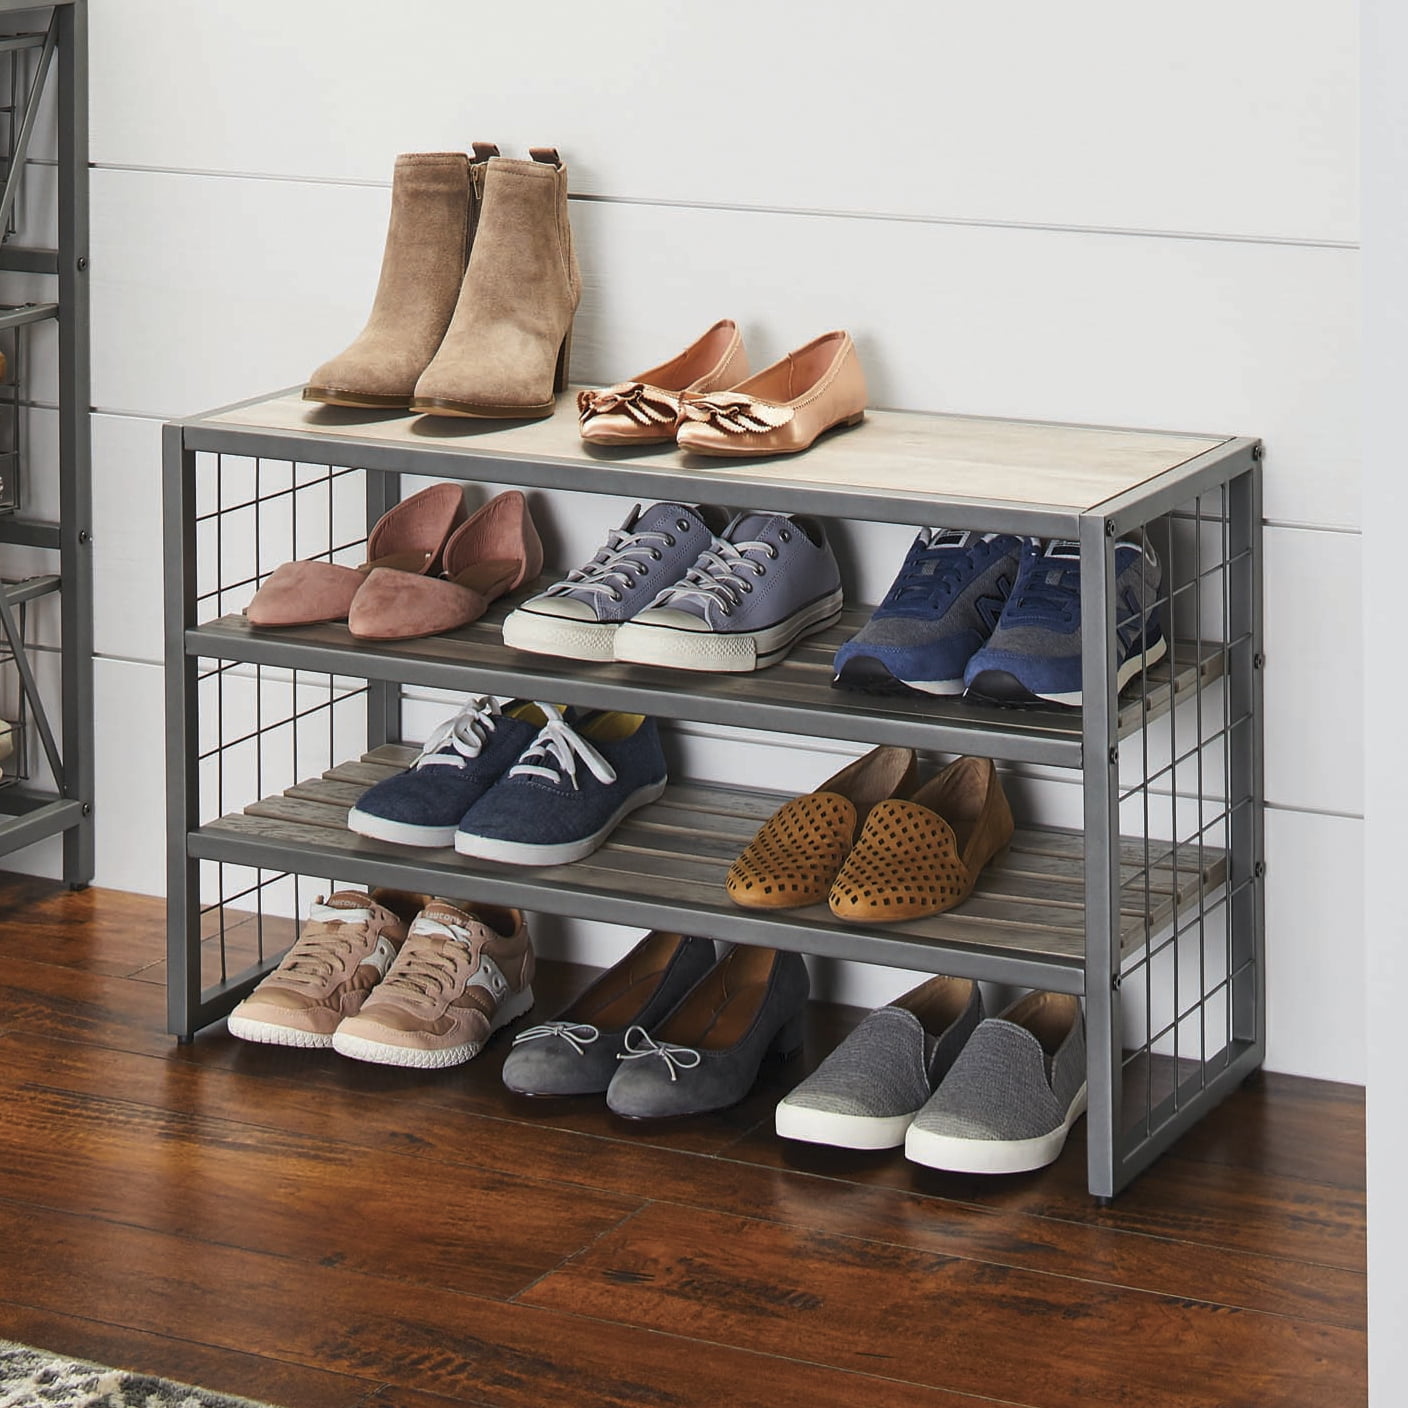 BEST SHOE RACKS - The Best Way to Organize Your Shoes!